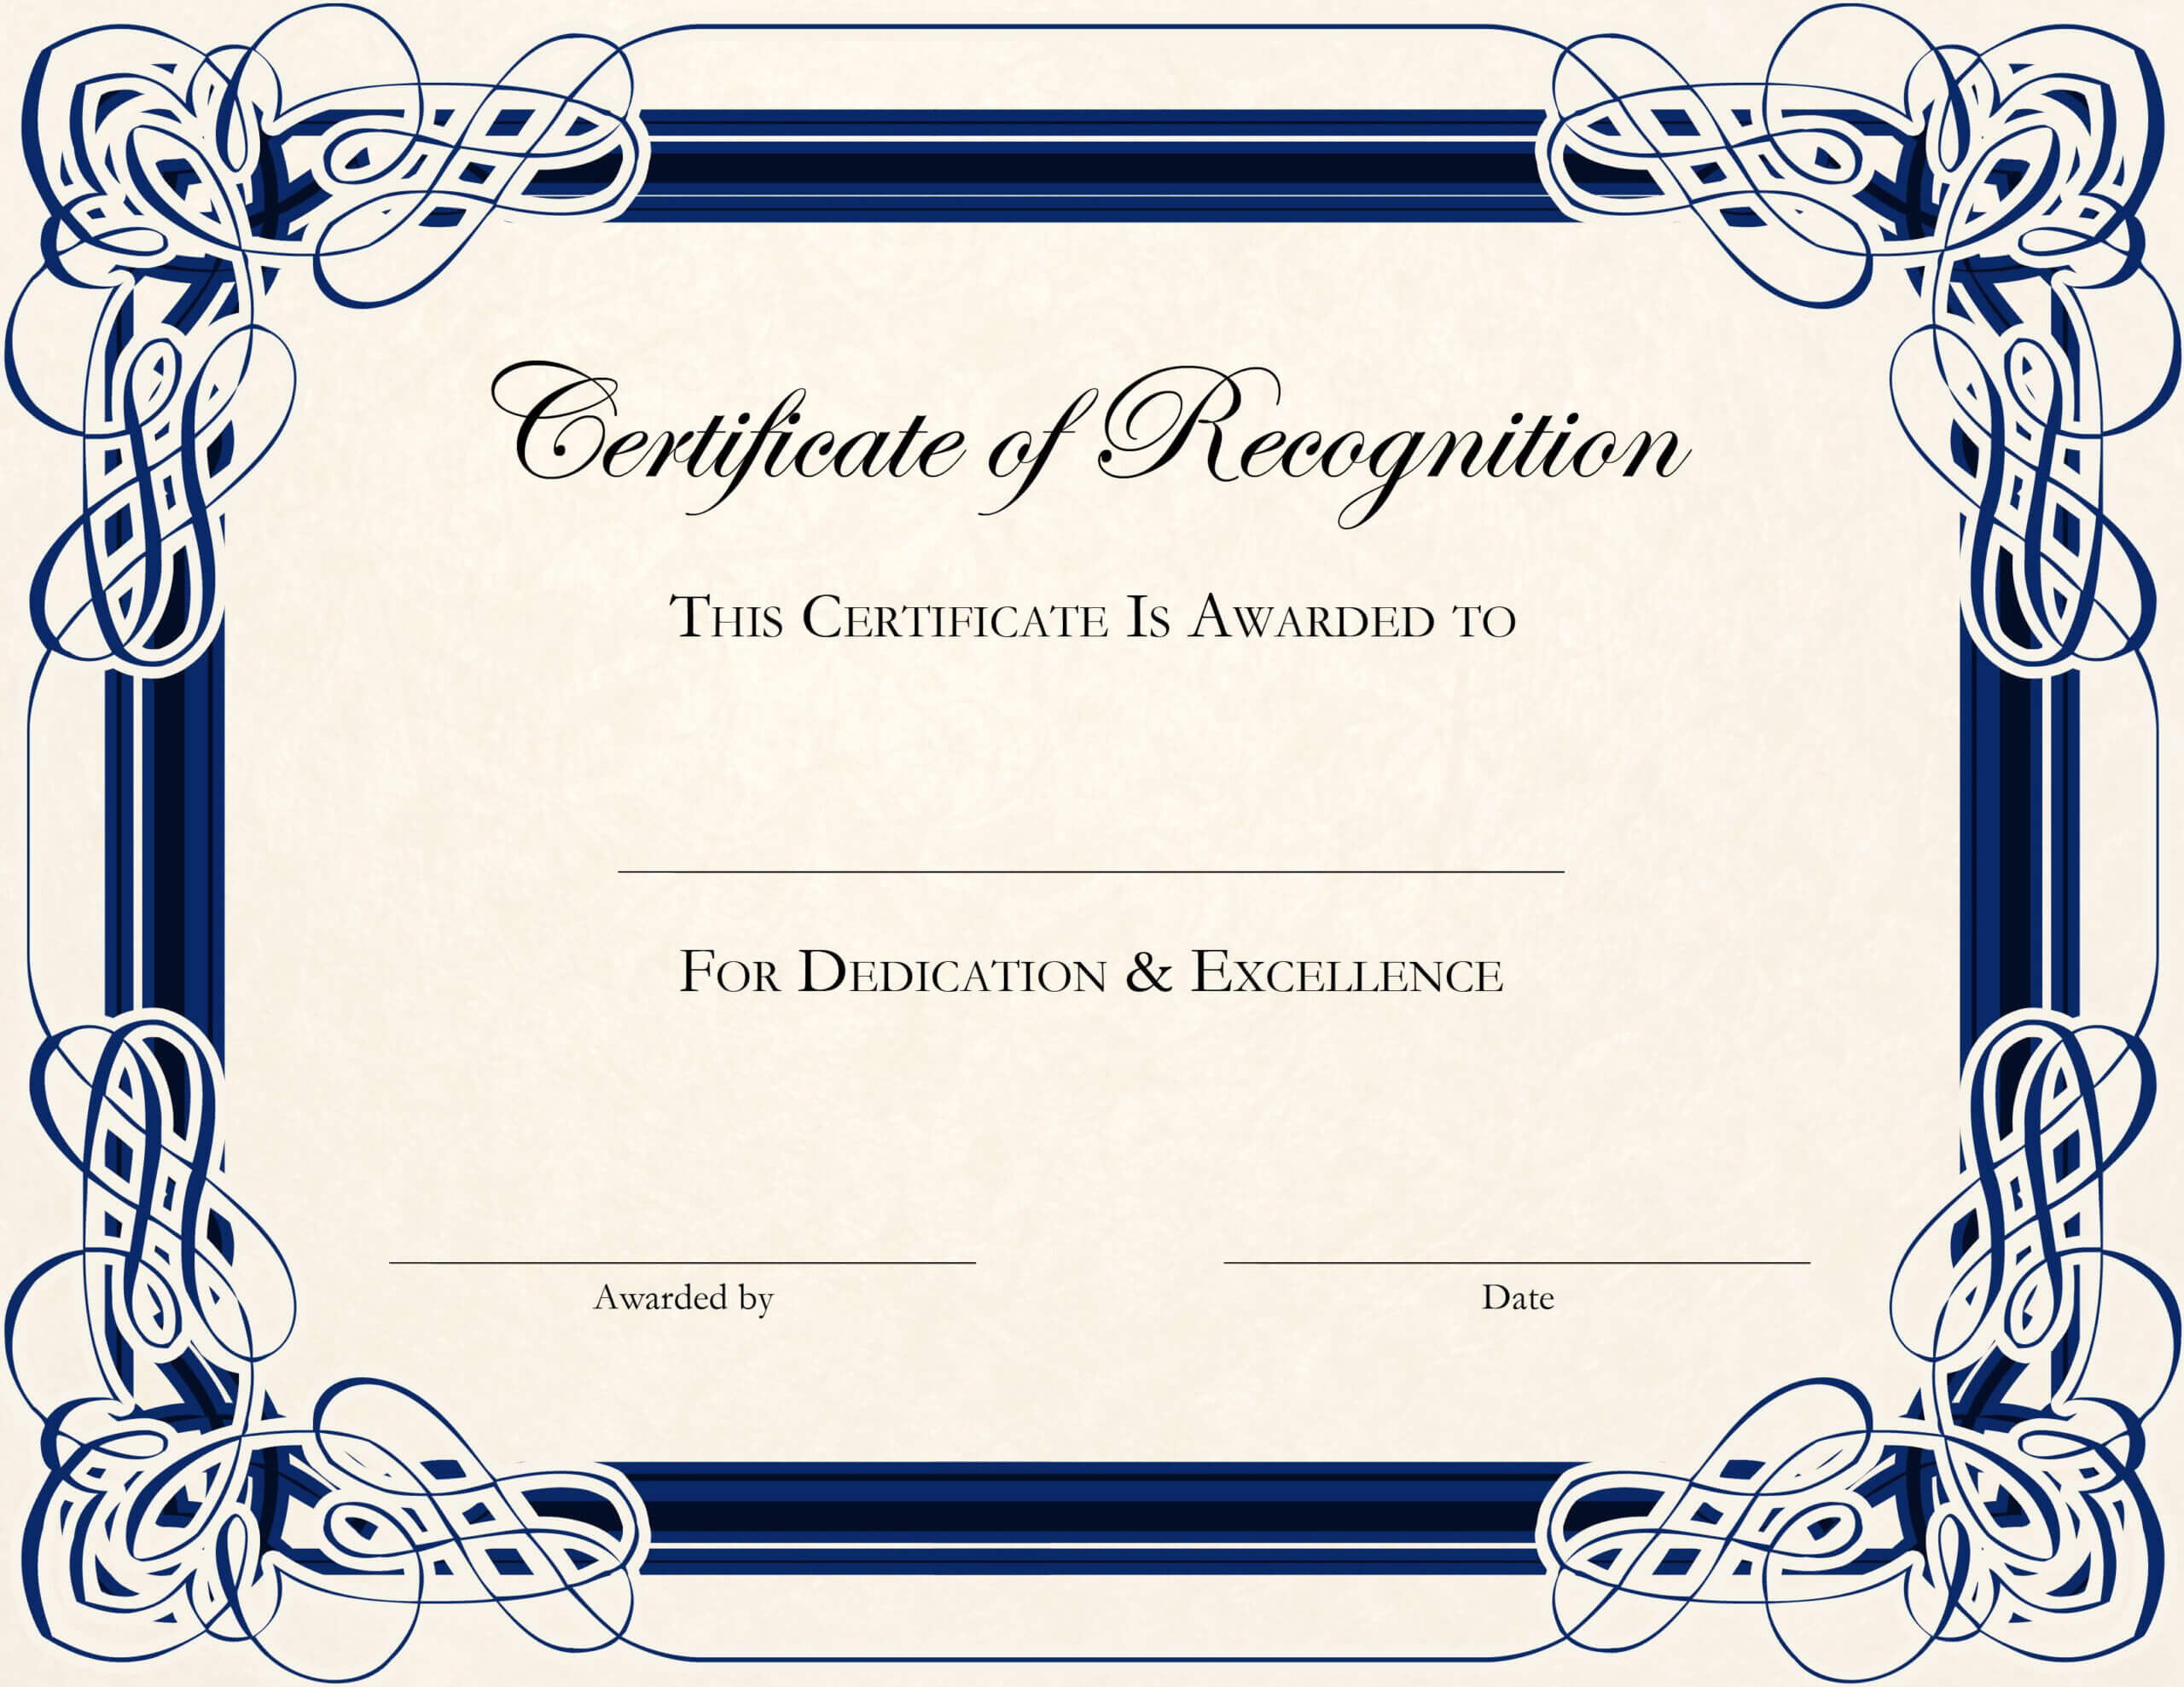 Certificate Template Designs Recognition Docs | Certificate Throughout Attendance Certificate Template Word